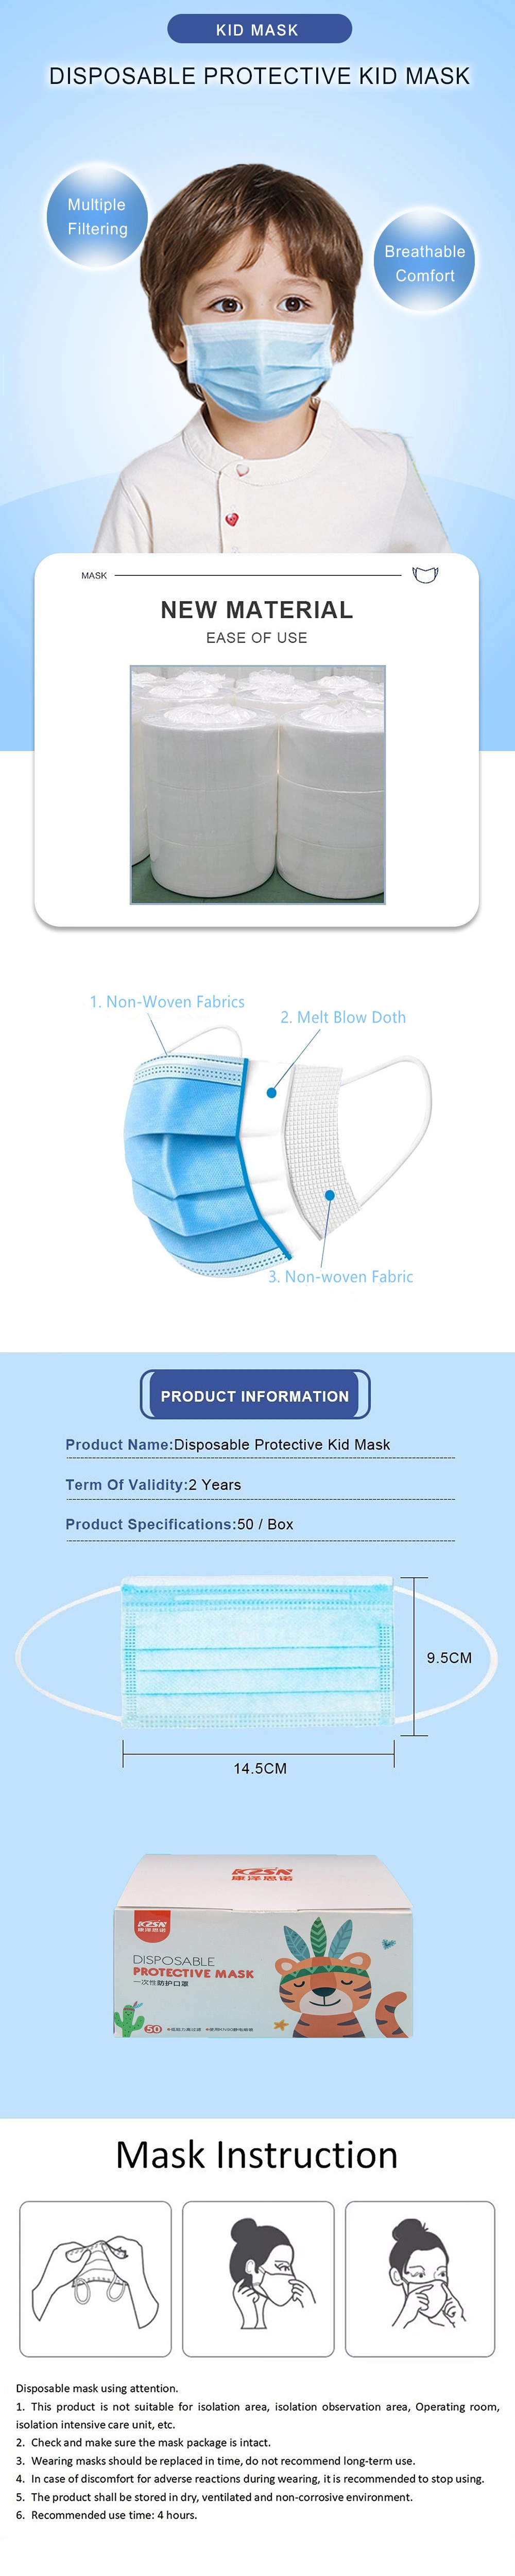 China Suppliers Wholesale Mouth Face Masks Safety Custom Respirator Folding Mask for Kids Children Students